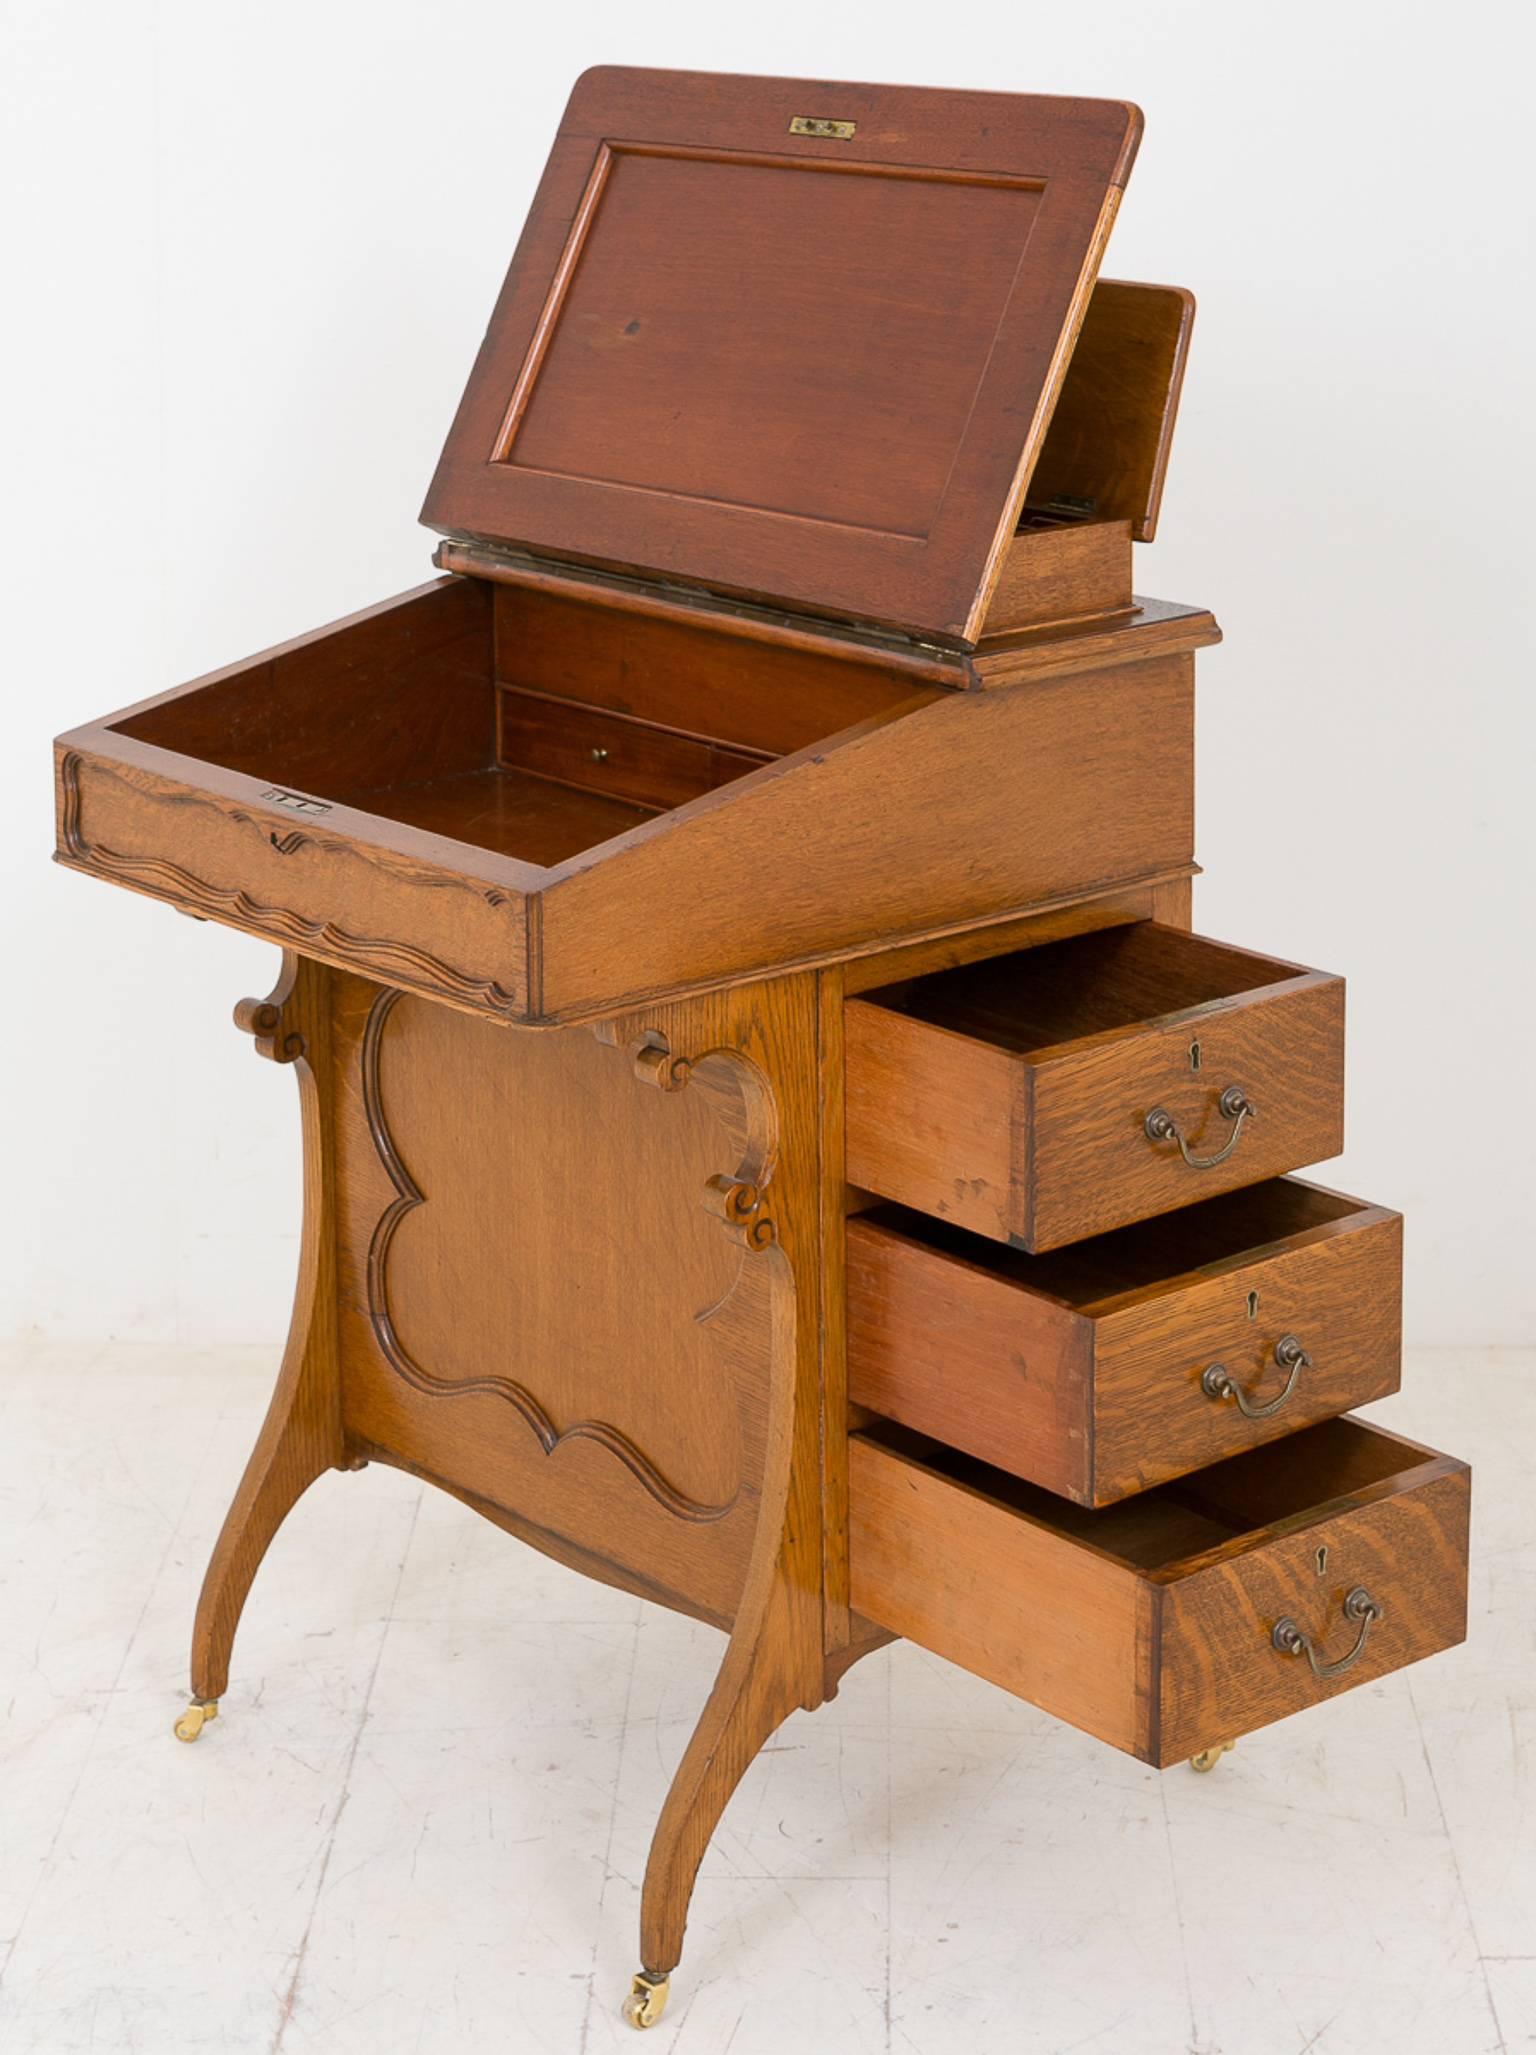 Oak Arts and Crafts style davenport, standing on swept legs with brass castors.
Three working mahogany lined drawers to the right hand side.
The leather covered writing slope opens to reveal two drawers.
The top section fitted with letter trays